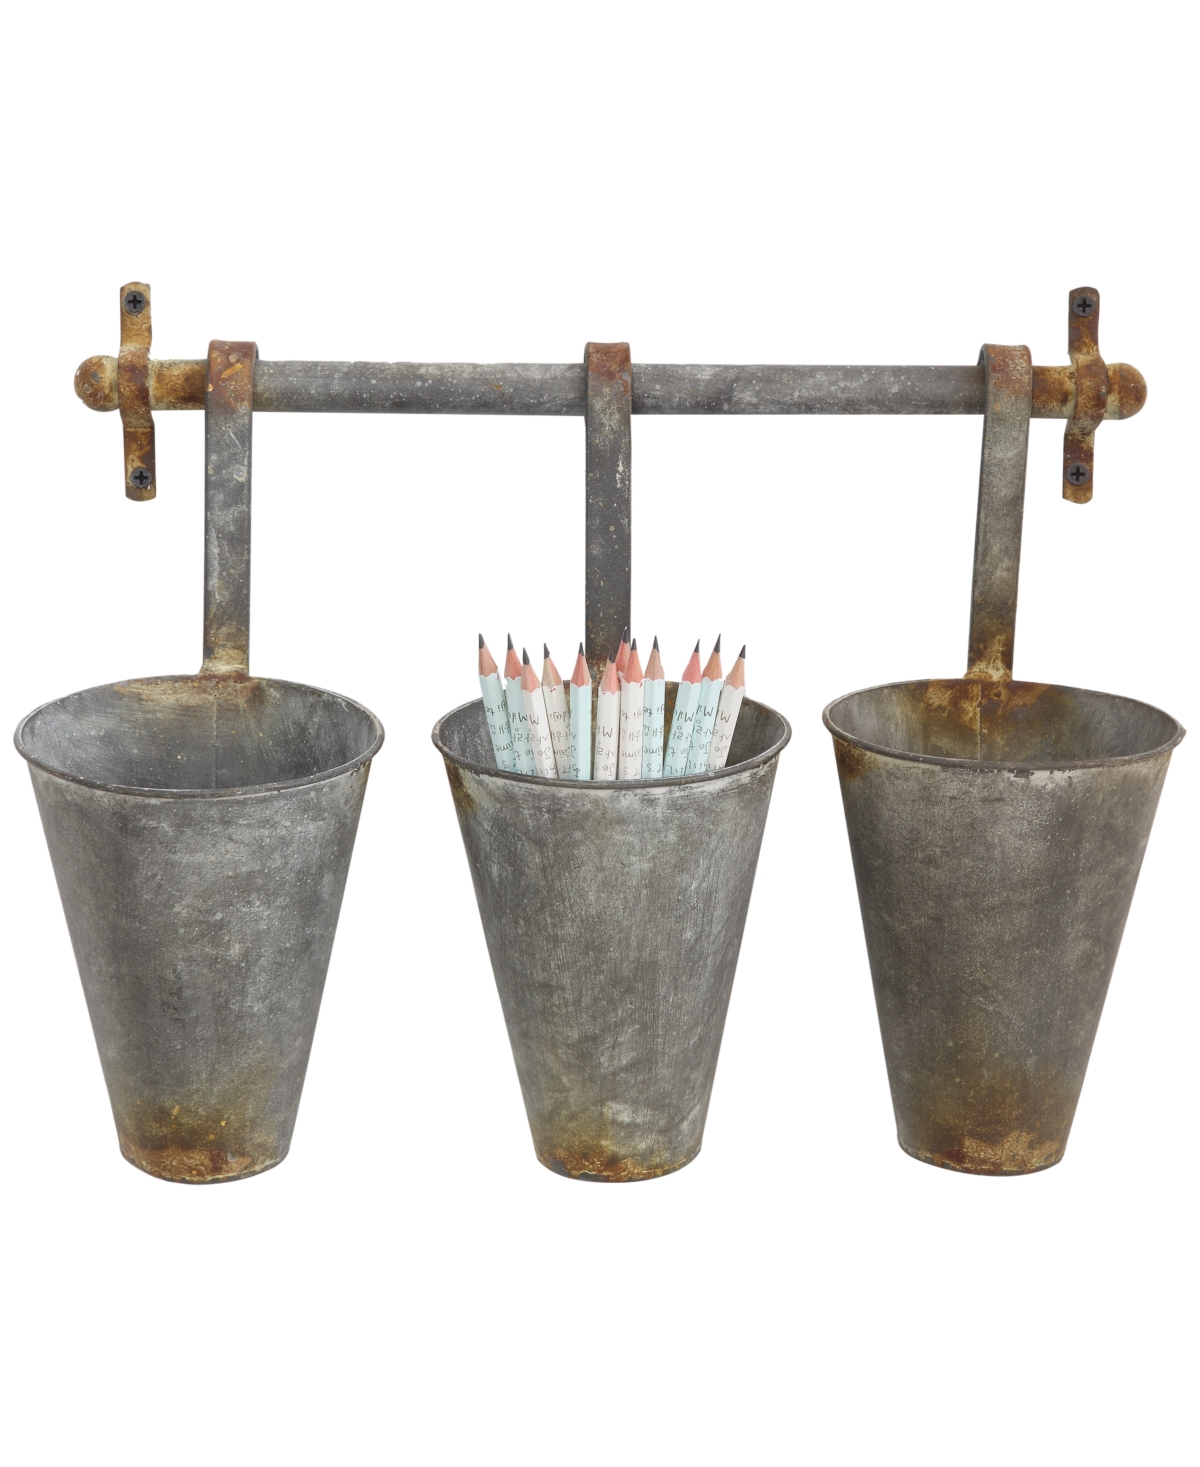 Antique-liked Metal Wall Rack with 3 Hanging Cone Pots, Gray - Distressed Gray